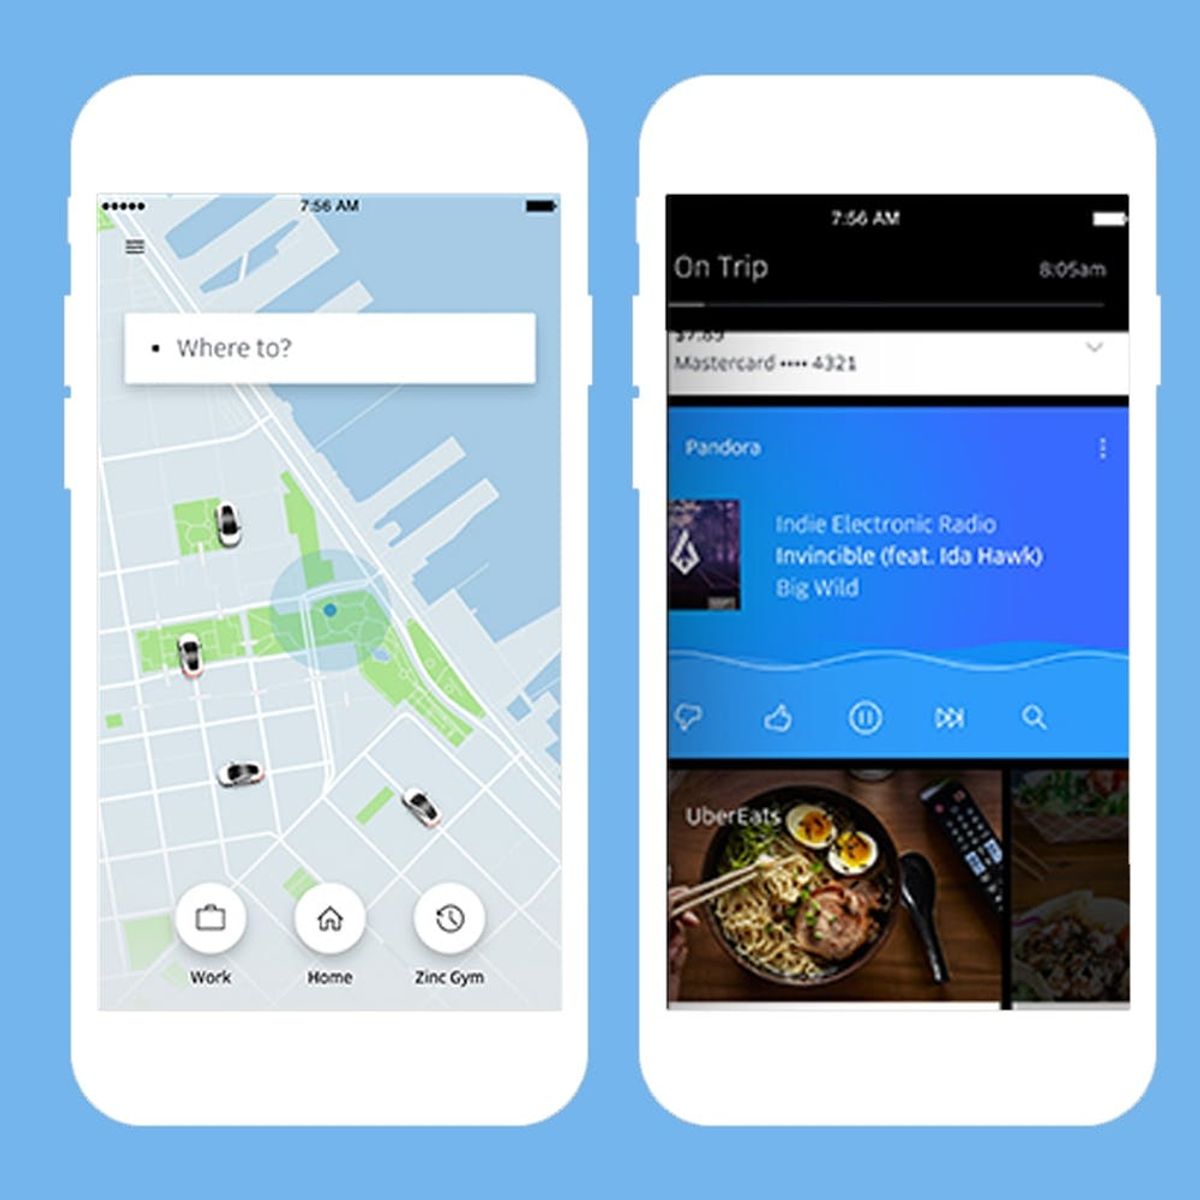 Uber’s Got a Brand New Look + 4 More Apps to DL